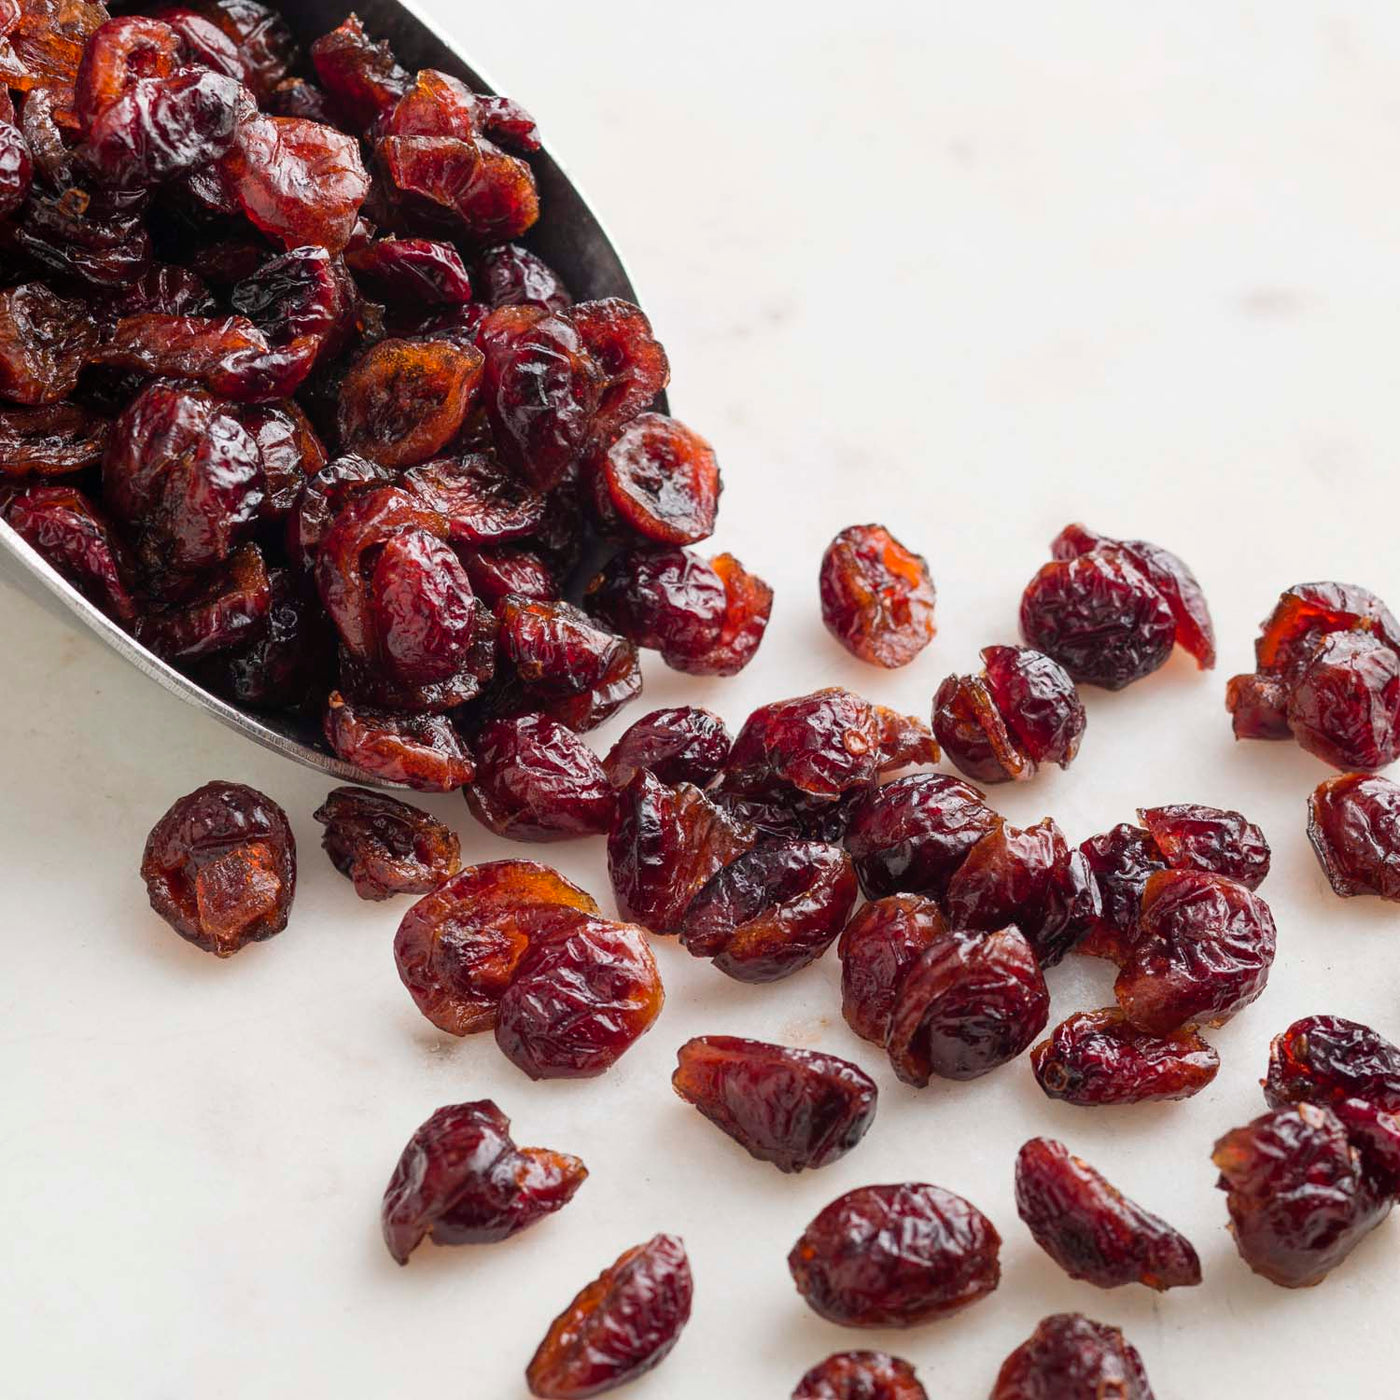 Whole Dried Cranberries (Dried in Apple Juice) - Organic